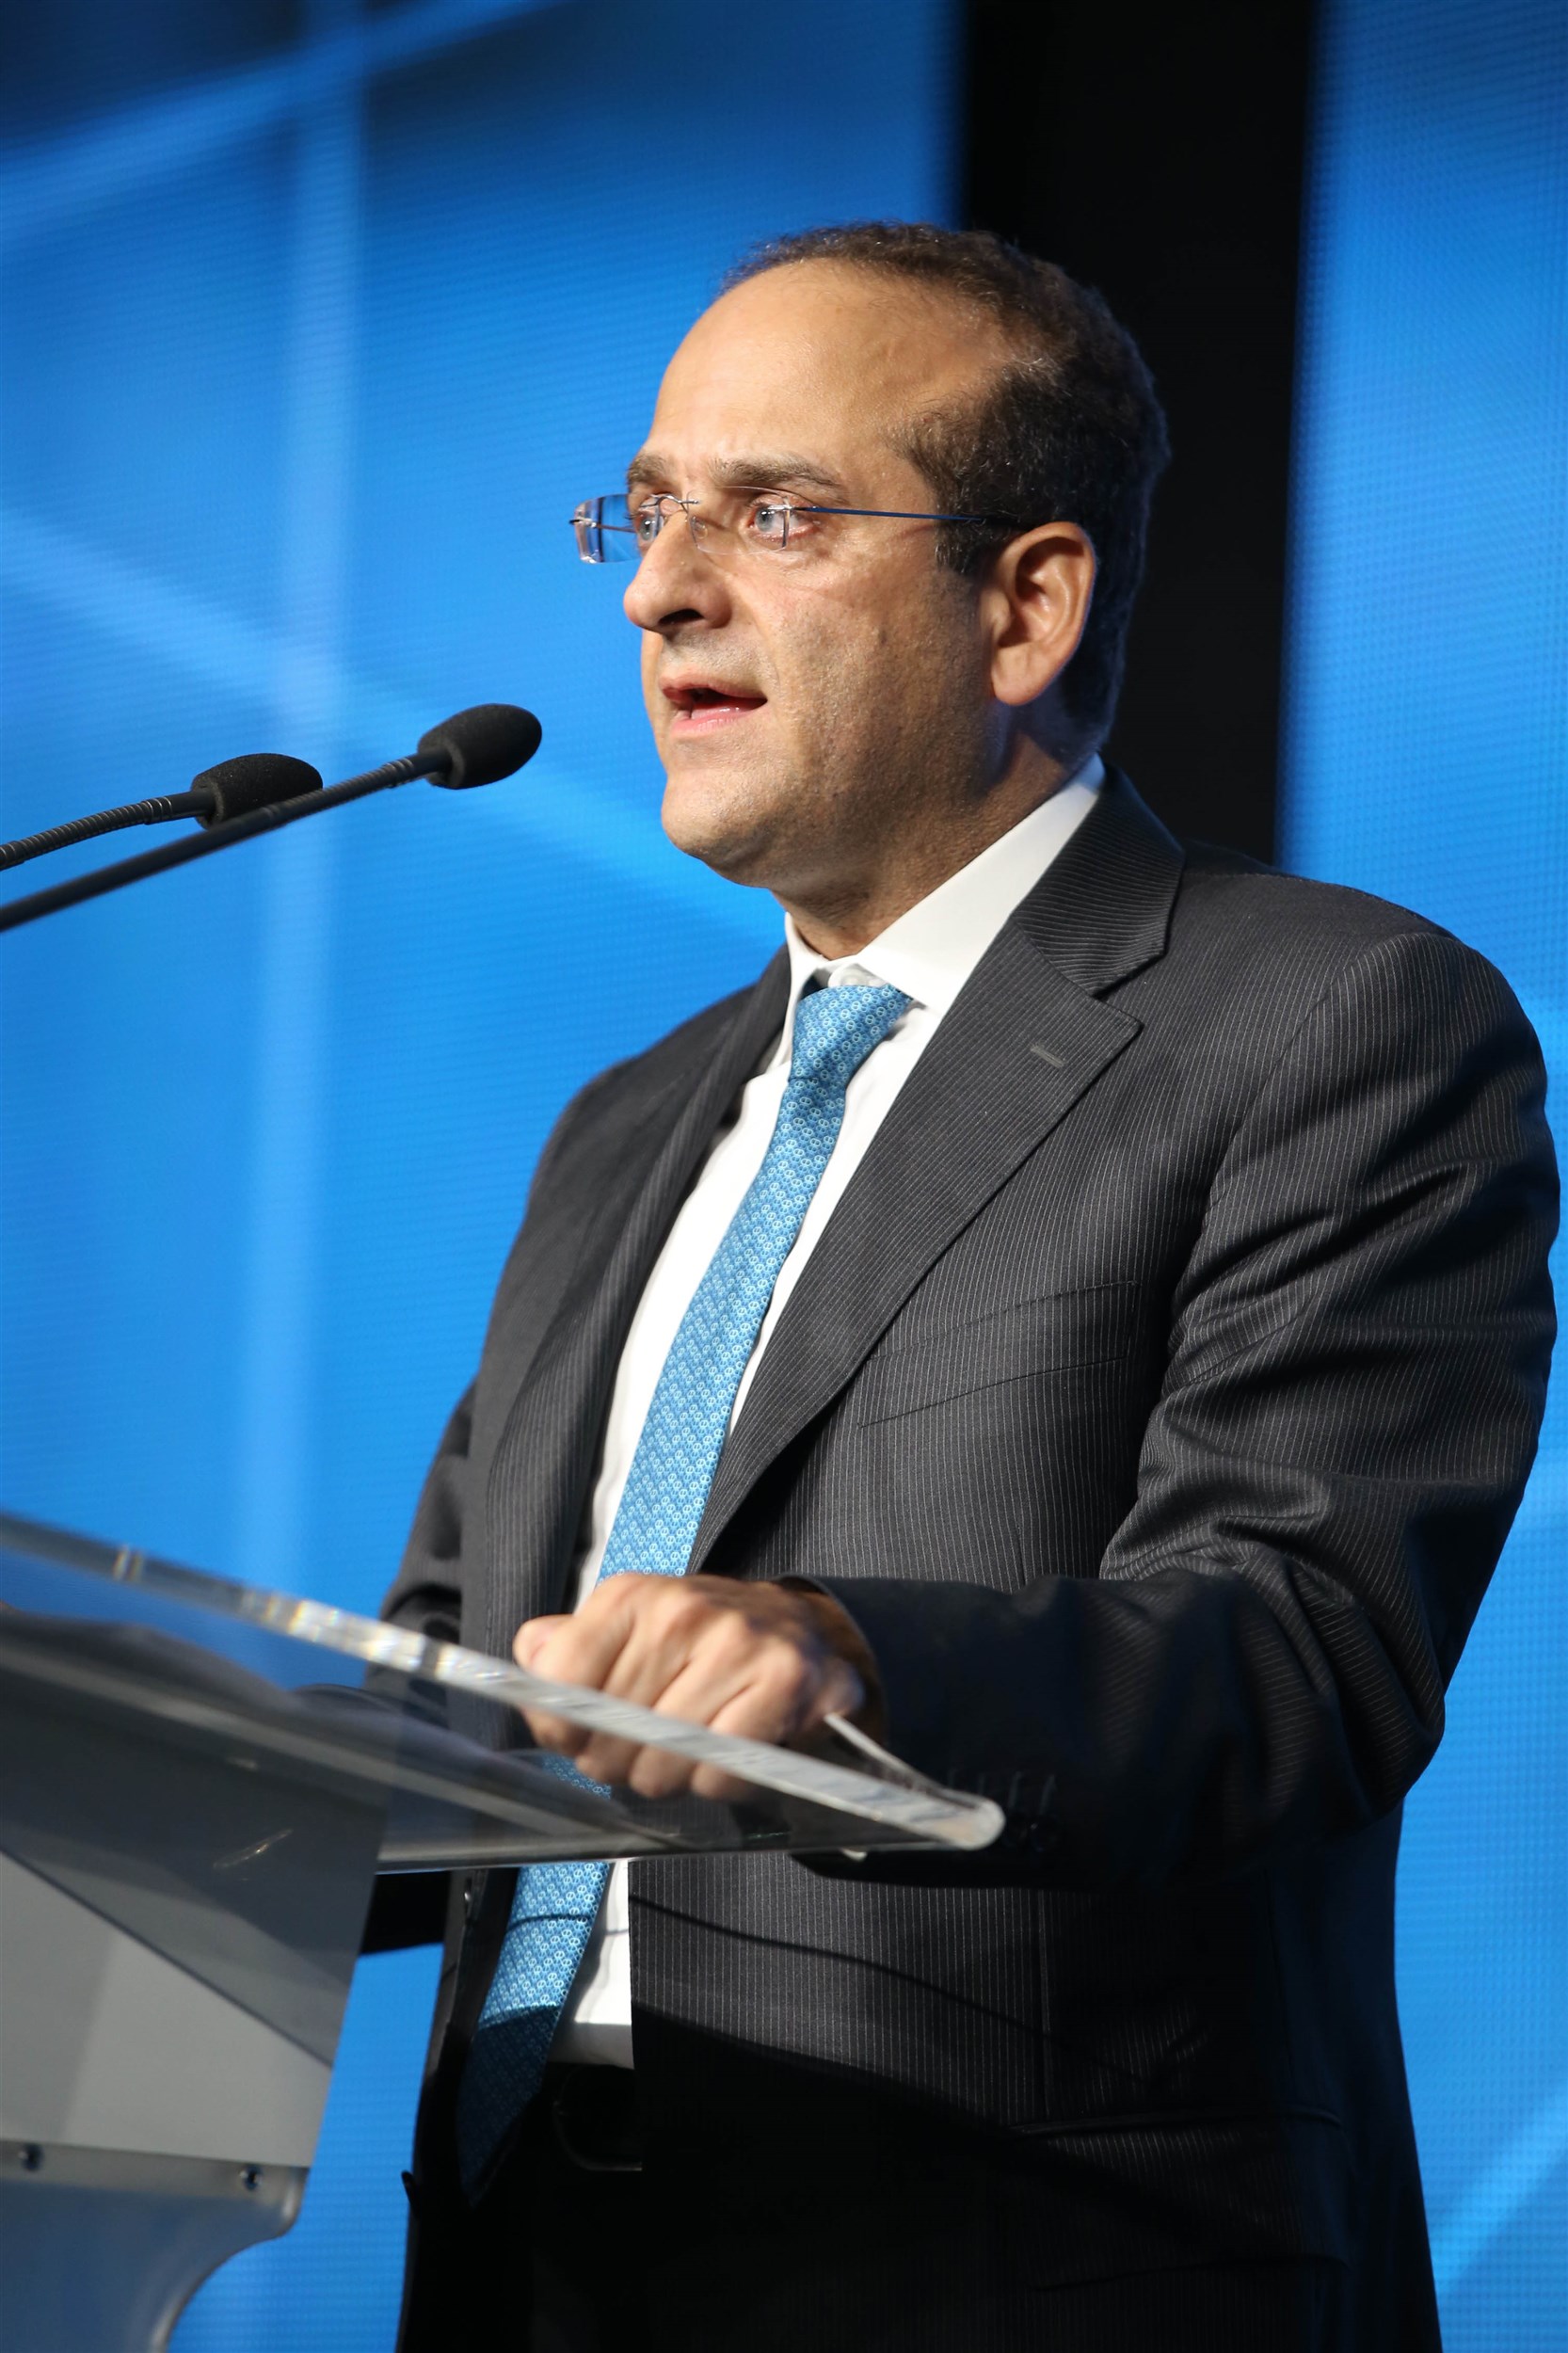 h.e. minister of economy mr. raed khoury during his speech